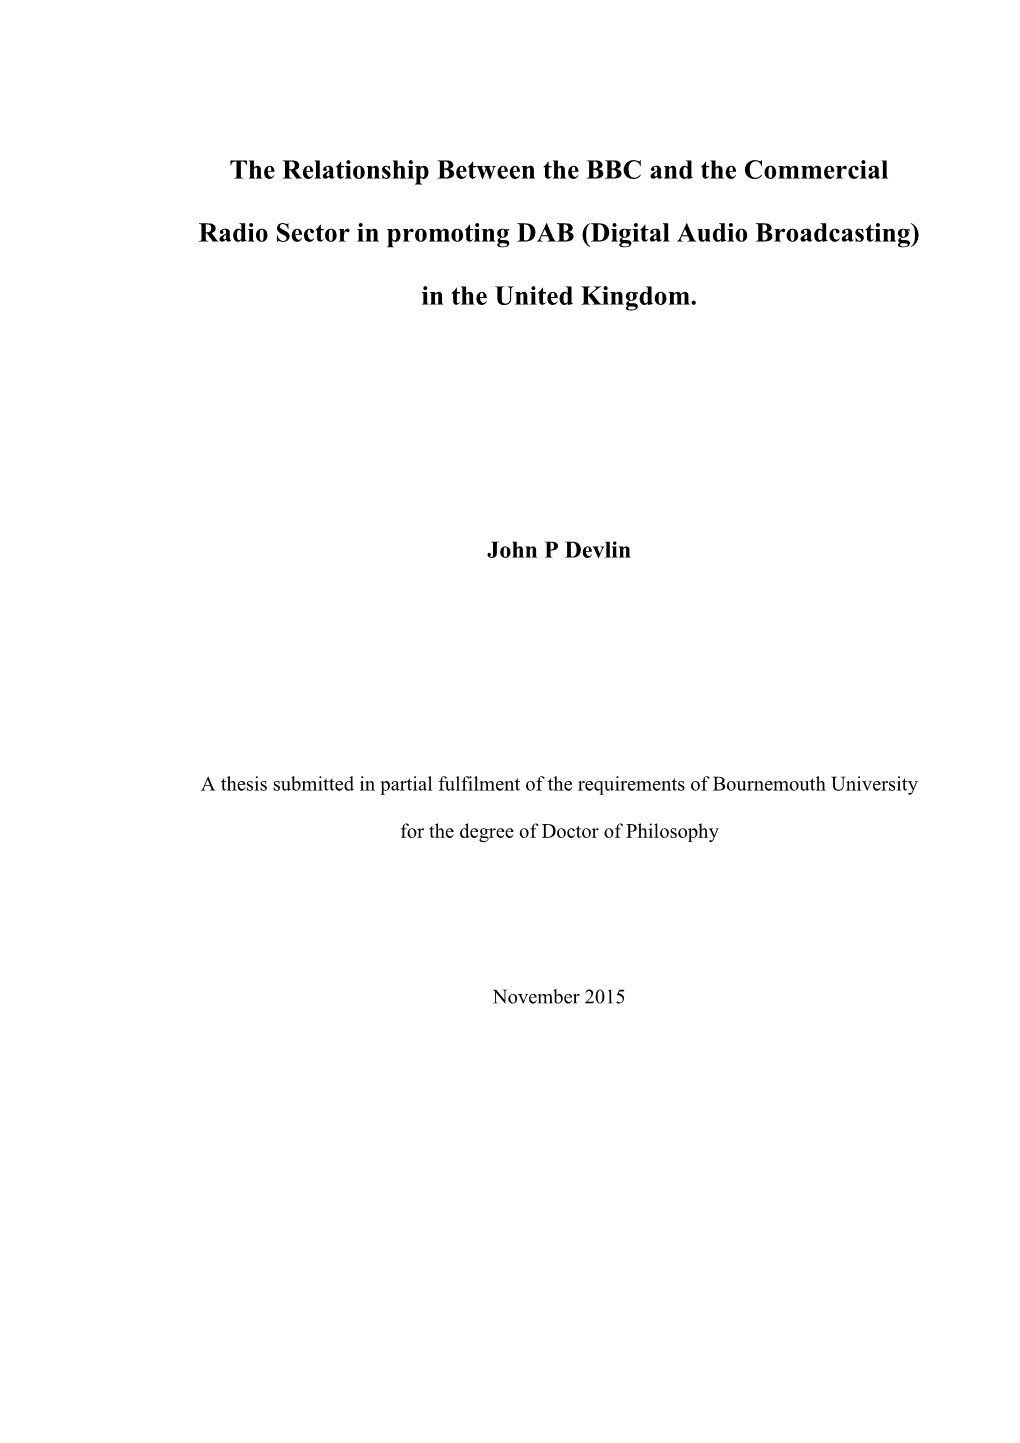 The Relationship Between the BBC and the Commercial Radio Sector